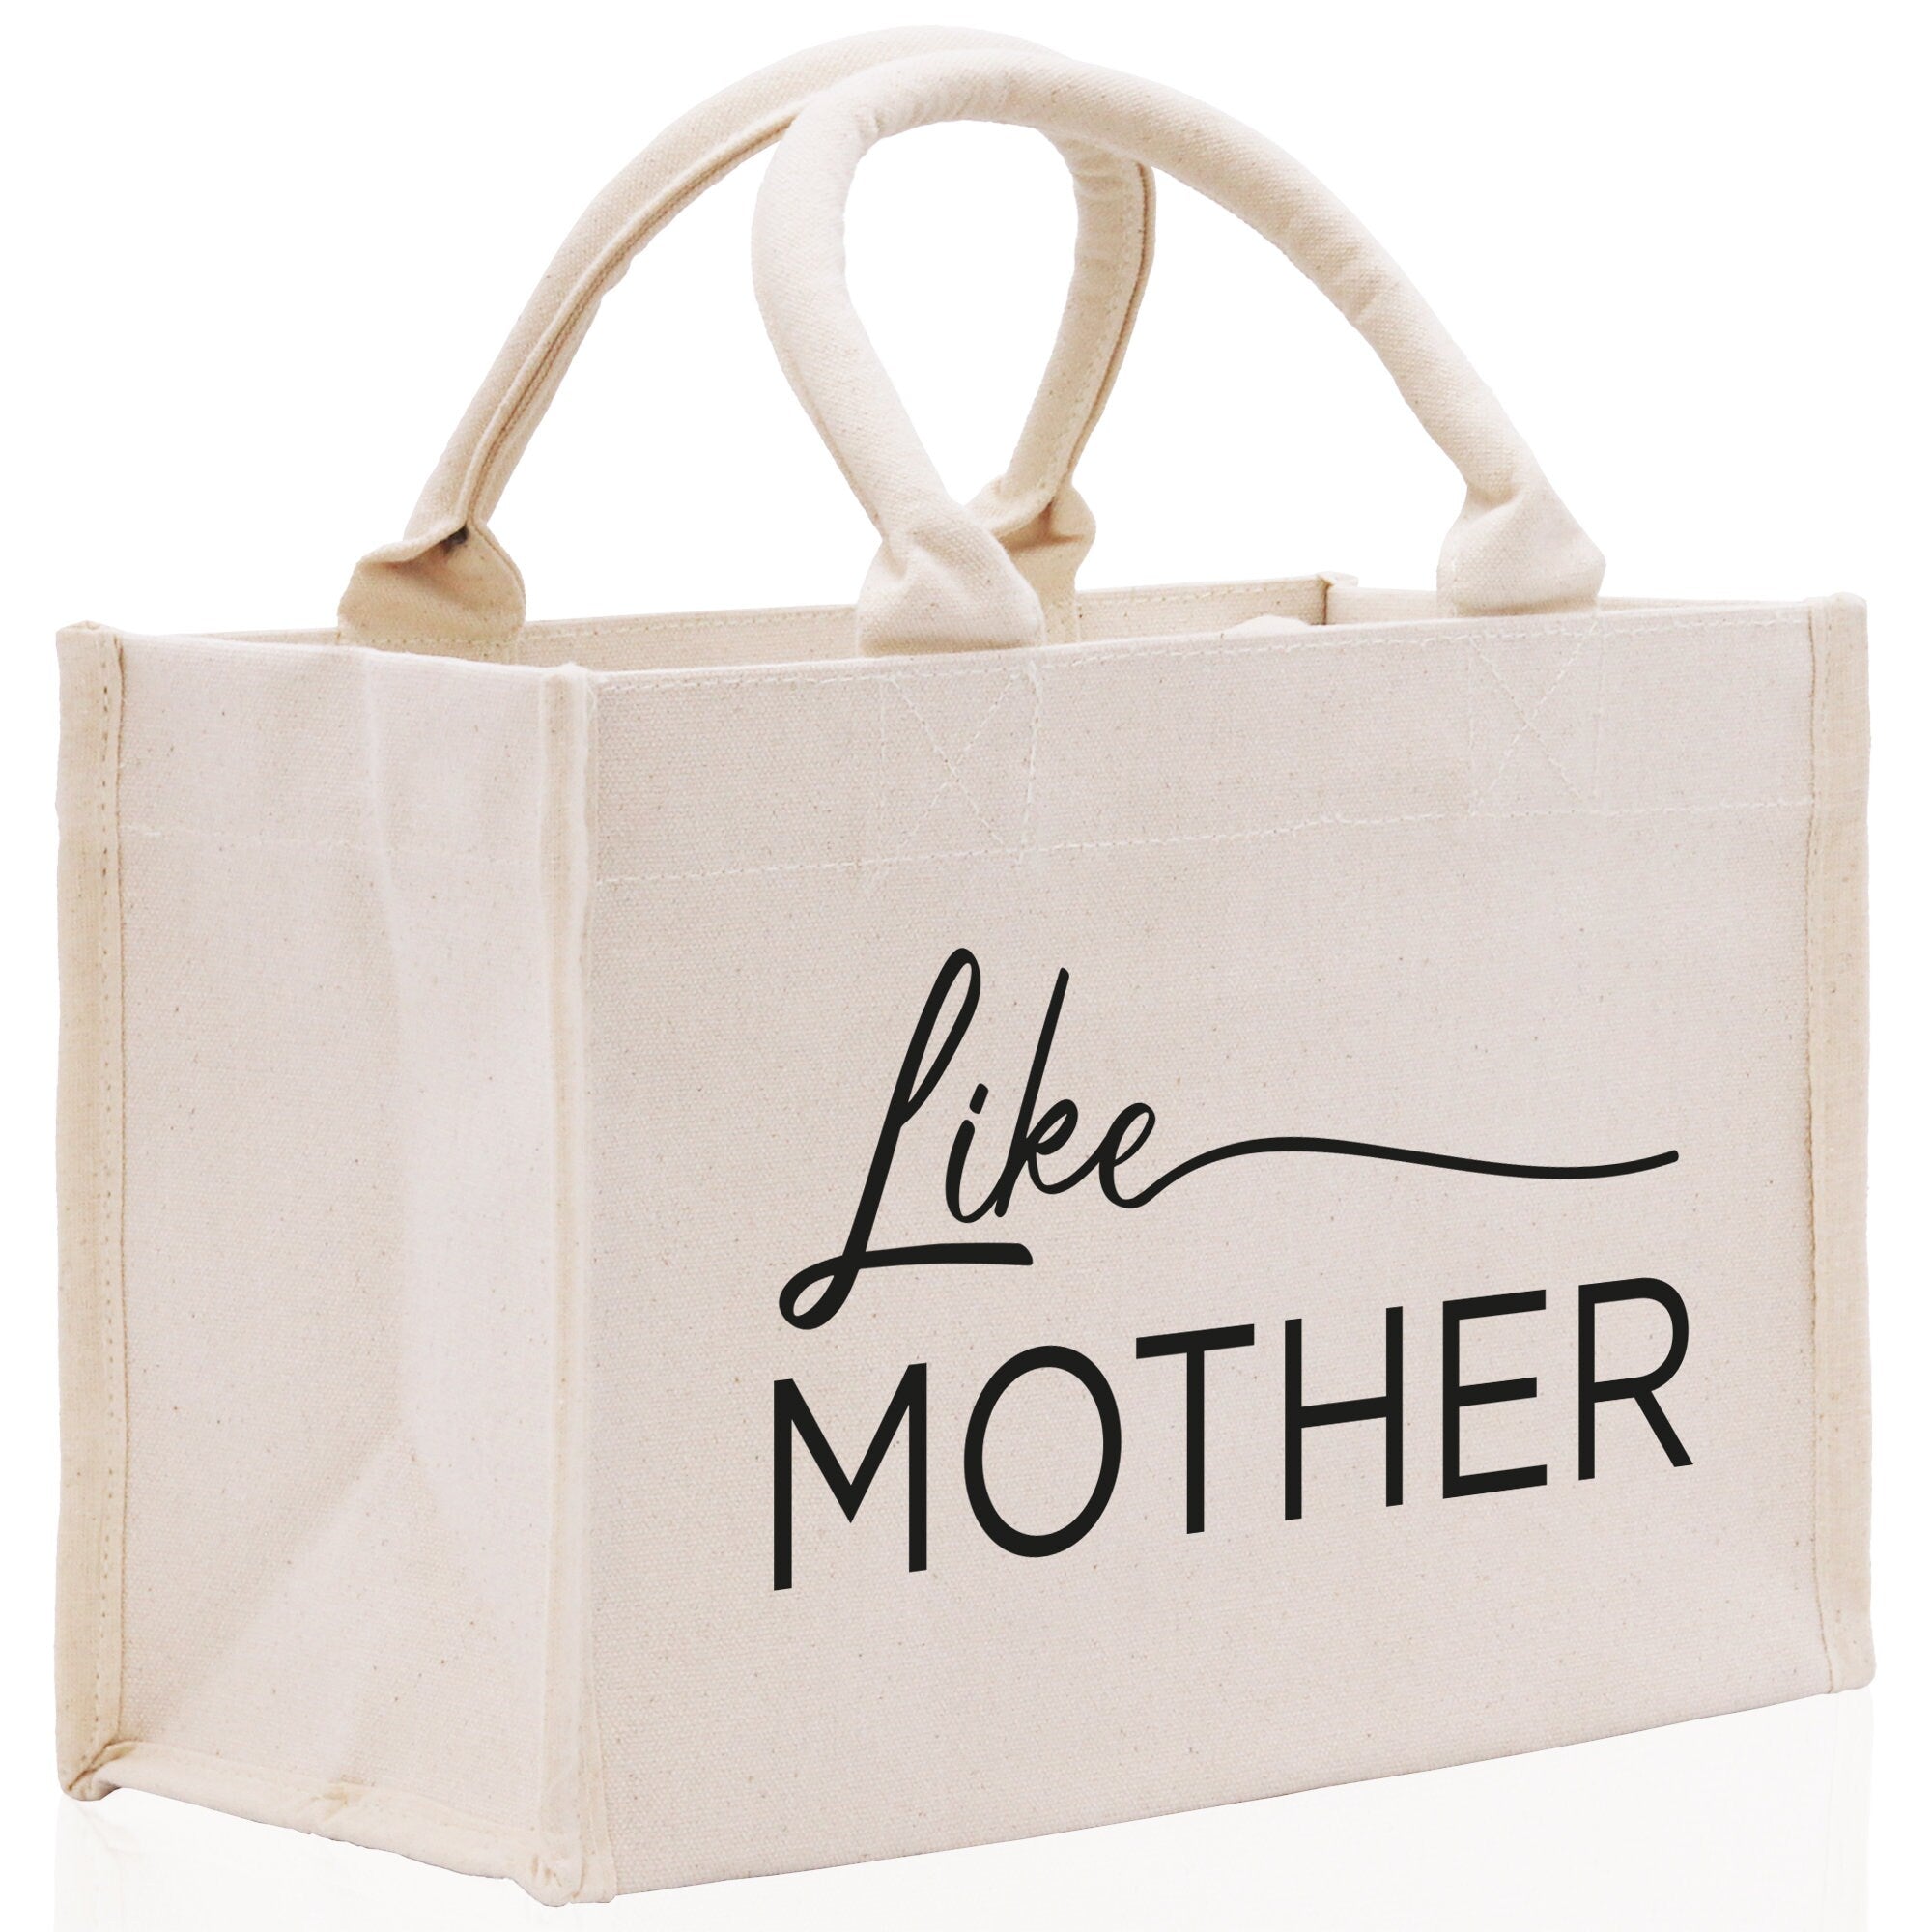 Like Mother Like Daughter Cotton Canvas Tote Bag Christmas For Mom Daughter Mather's Day Gift From Daughter Tote Bag Mom Daughter Gifts Bag